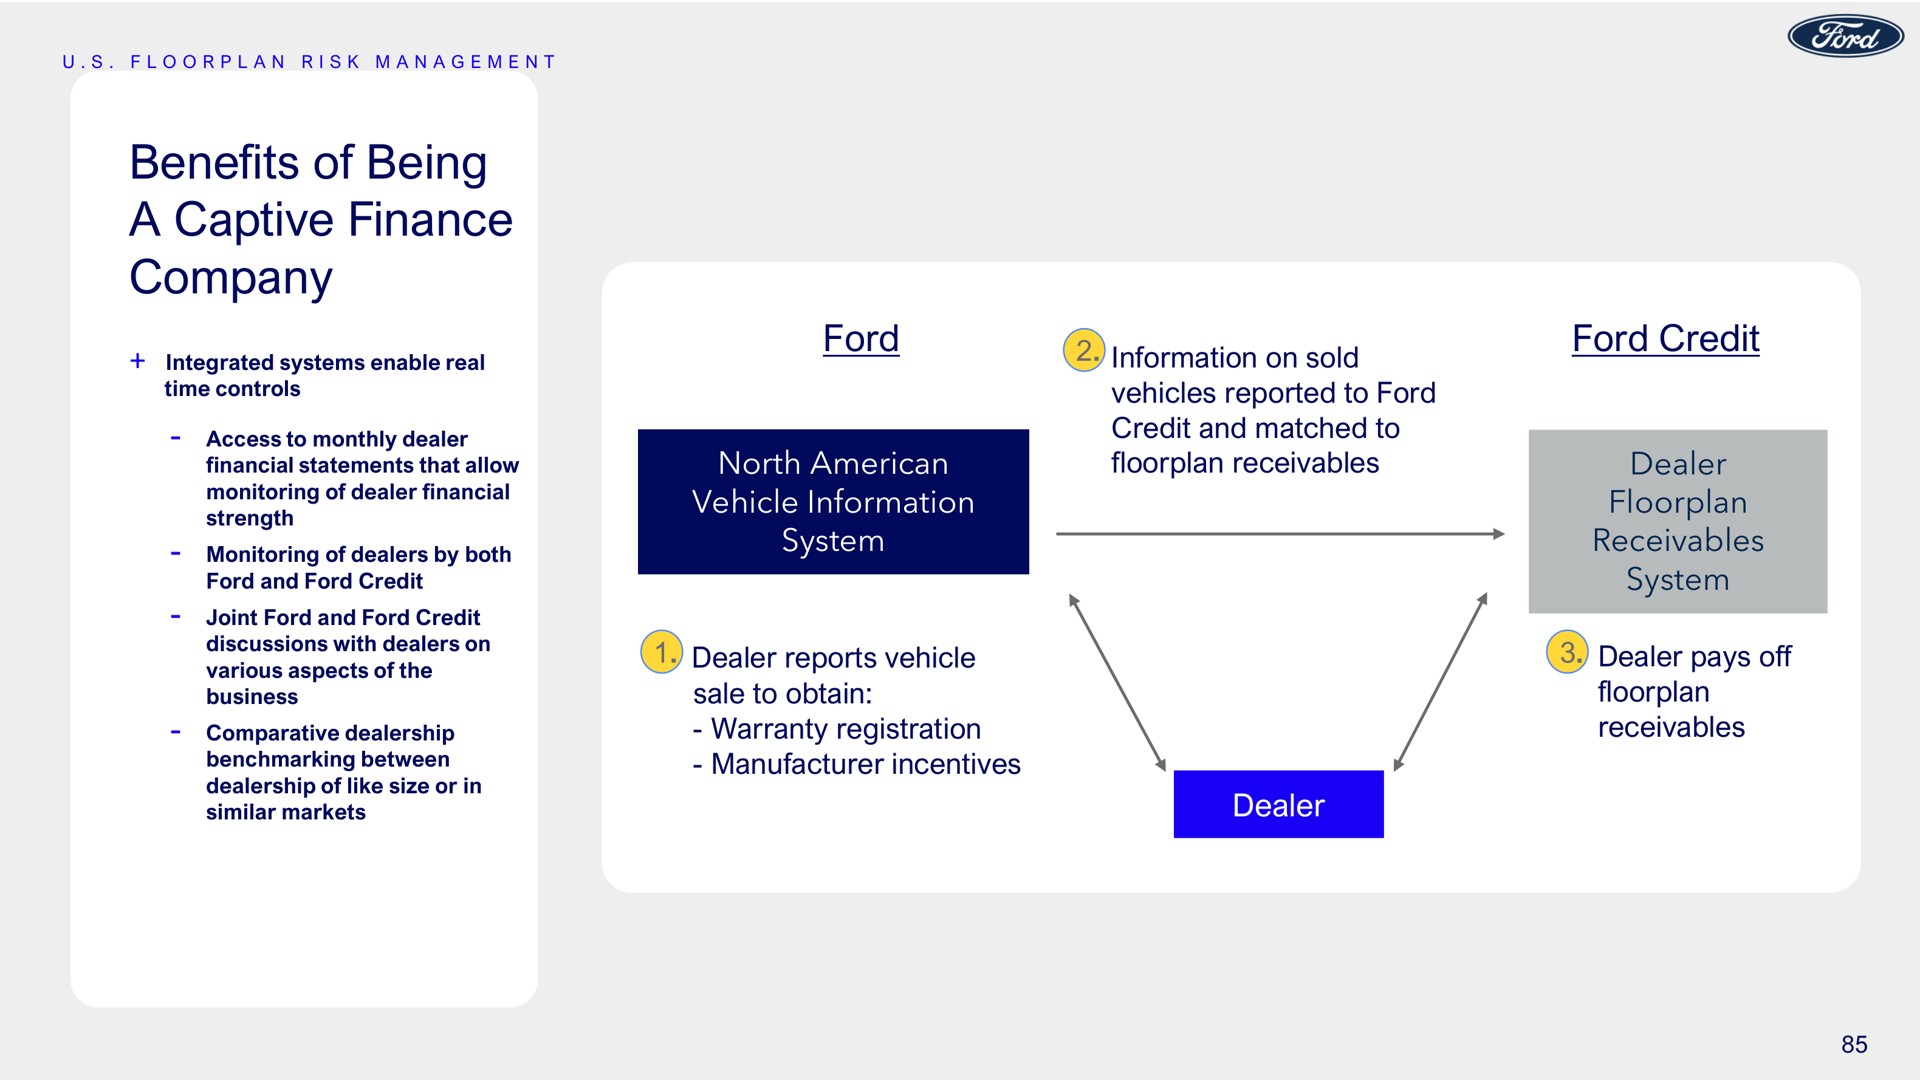 benefits of being a captive finance company ford north vehicle information system dealer ford credit dealer receivables system | Ford